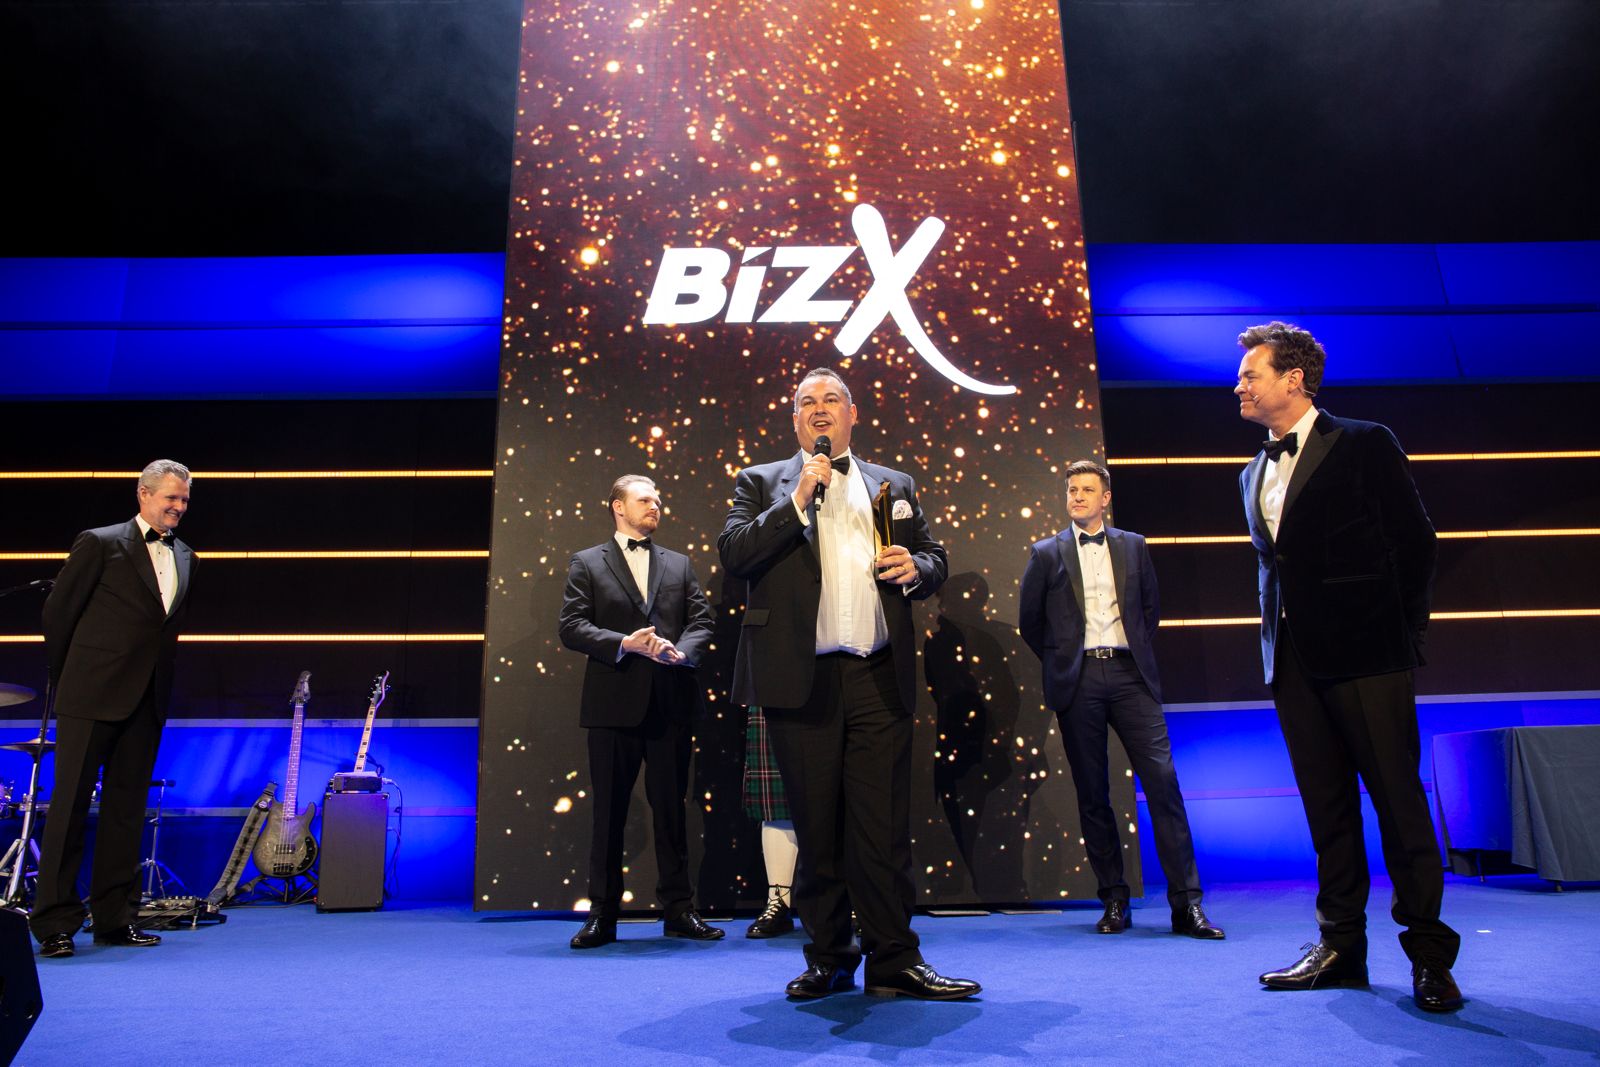 Steve Pailthorpe Speaks at the BizX Awards to Accept the award